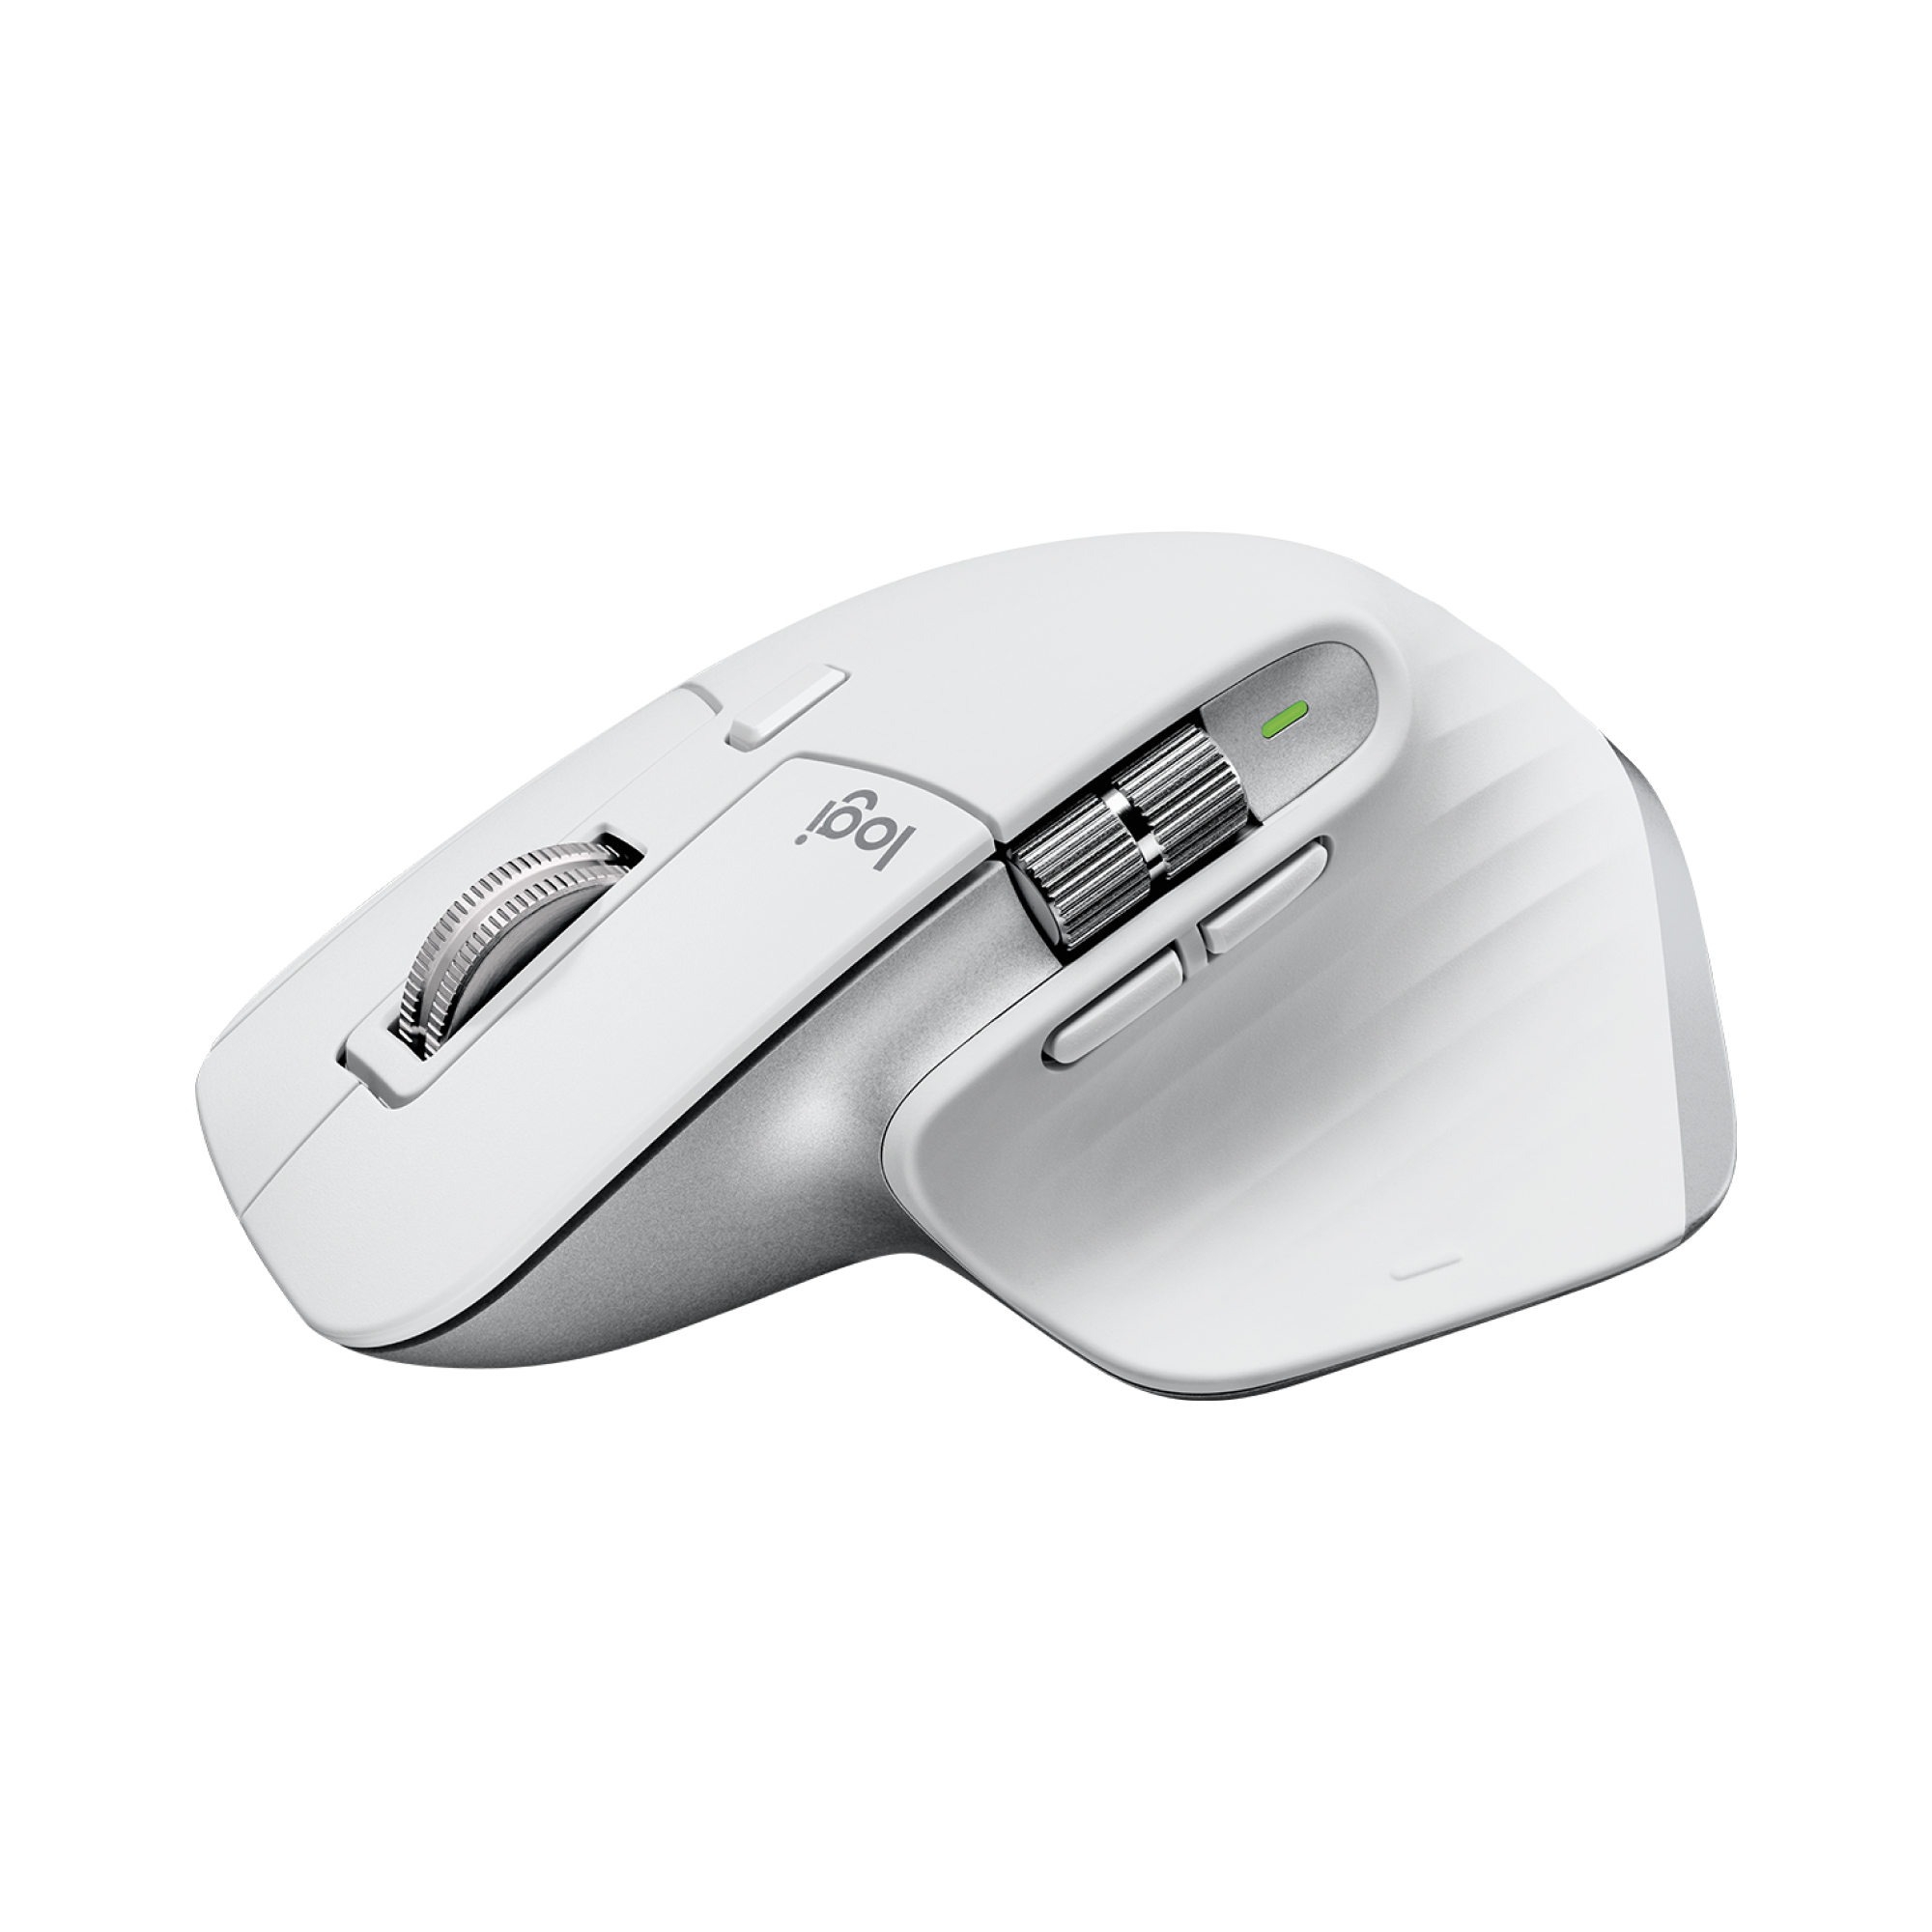  MX Master 3S Performance Wireless Mouse - Pale Grey